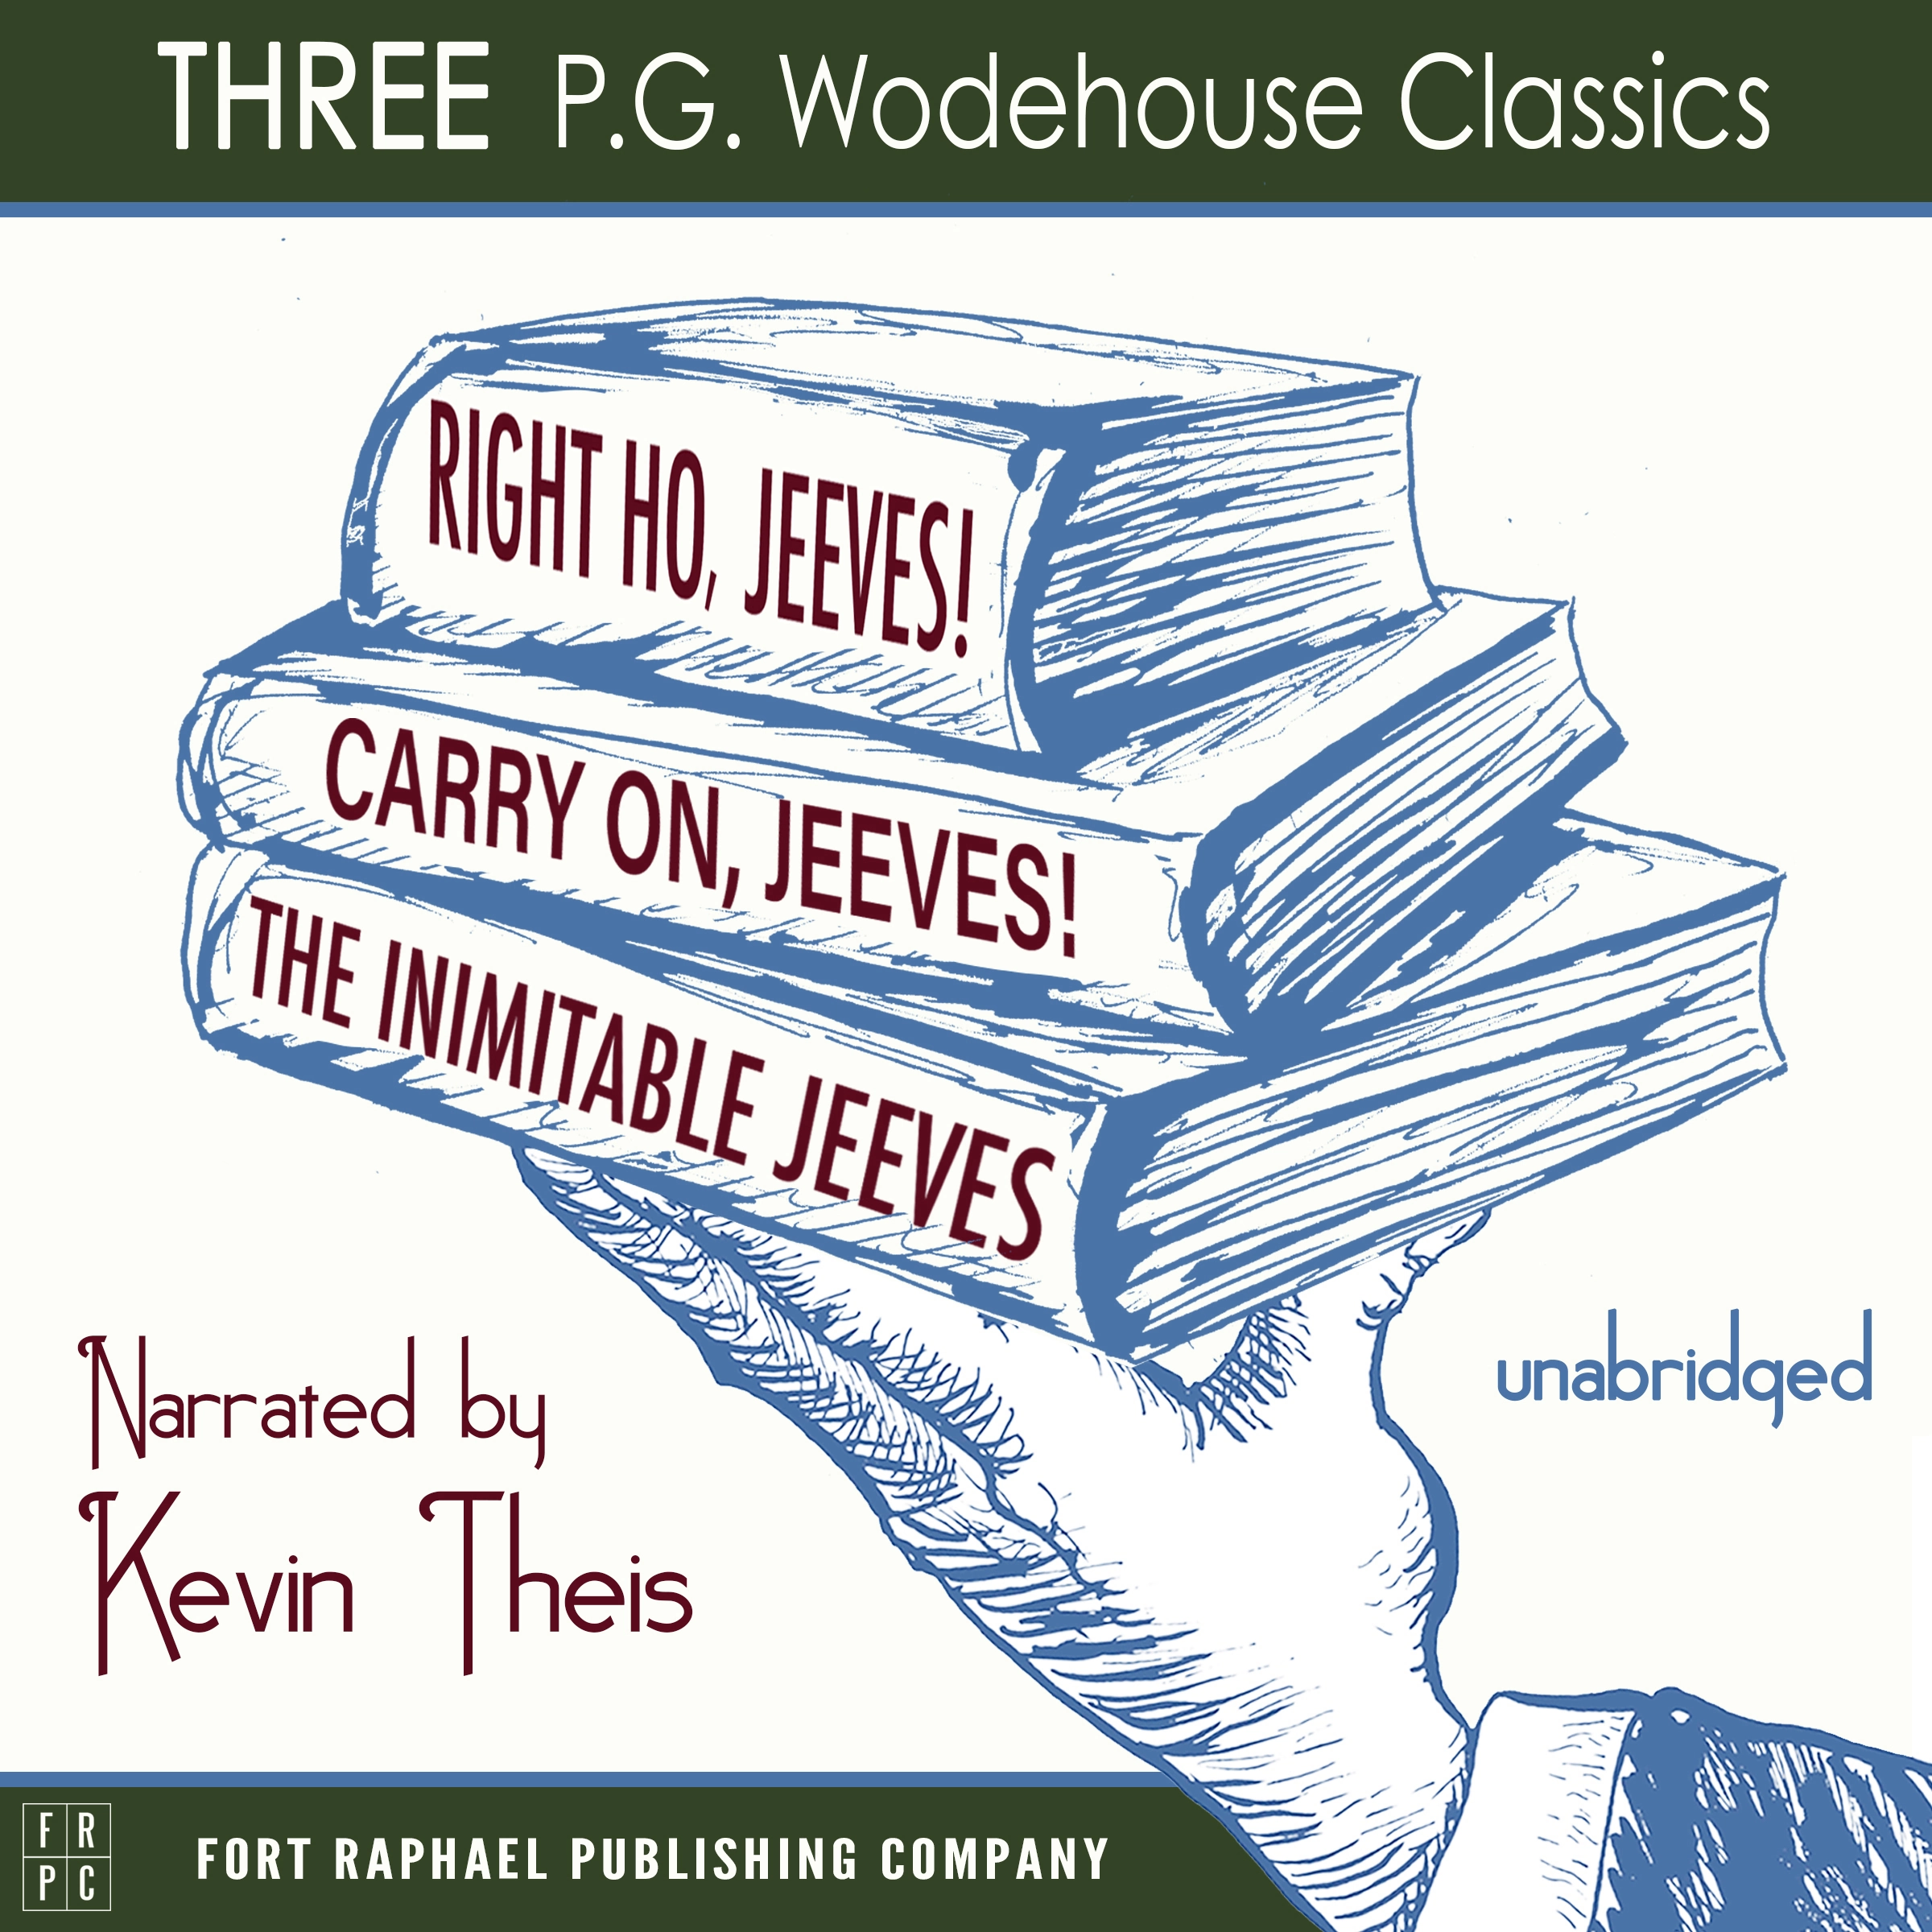 Carry On, Jeeves, The Inimitable Jeeves and Right Ho, Jeeves - THREE P.G. Wodehouse Classics! - Unabridged by P.G. Wodehouse Audiobook